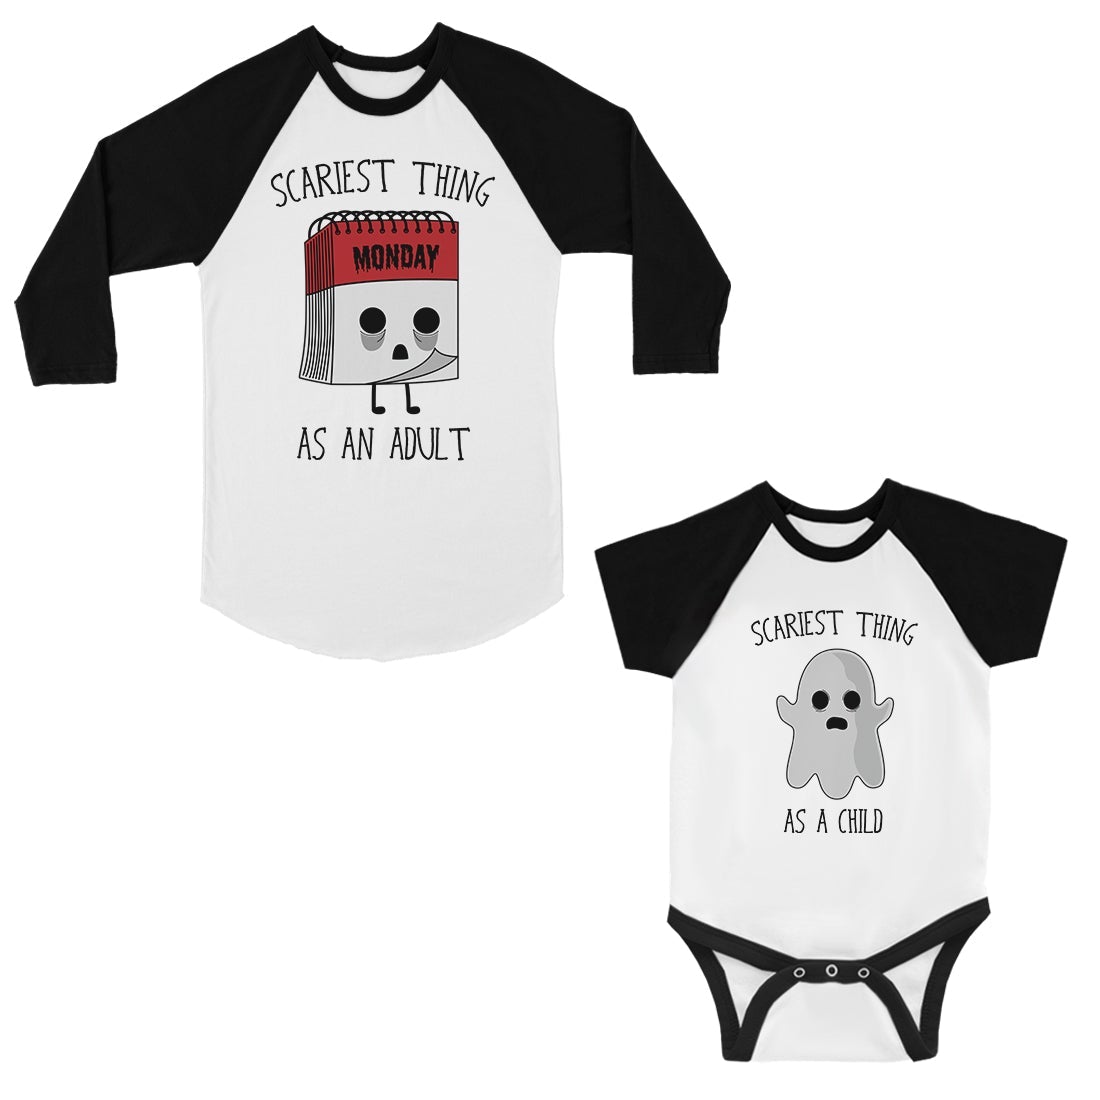 Scariest Thing As an Adult and Child Mom and Baby Boy Matching Outfits Cute Bodysuit Black and White